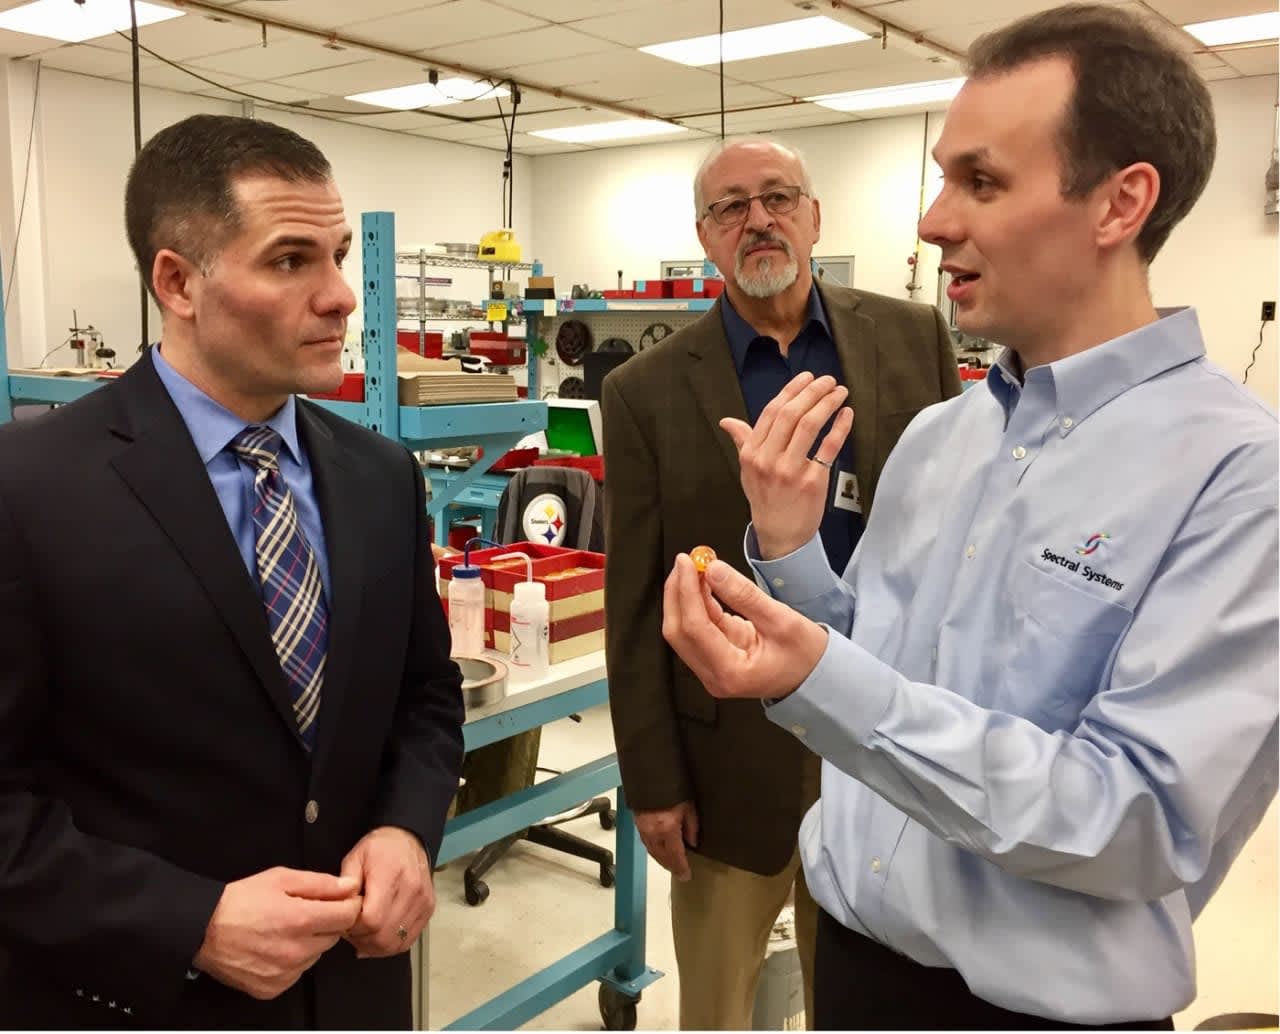 County Executive Marc Molinaro (left) and Christopher Harrower, a senior process engineer at Spectral Systems.